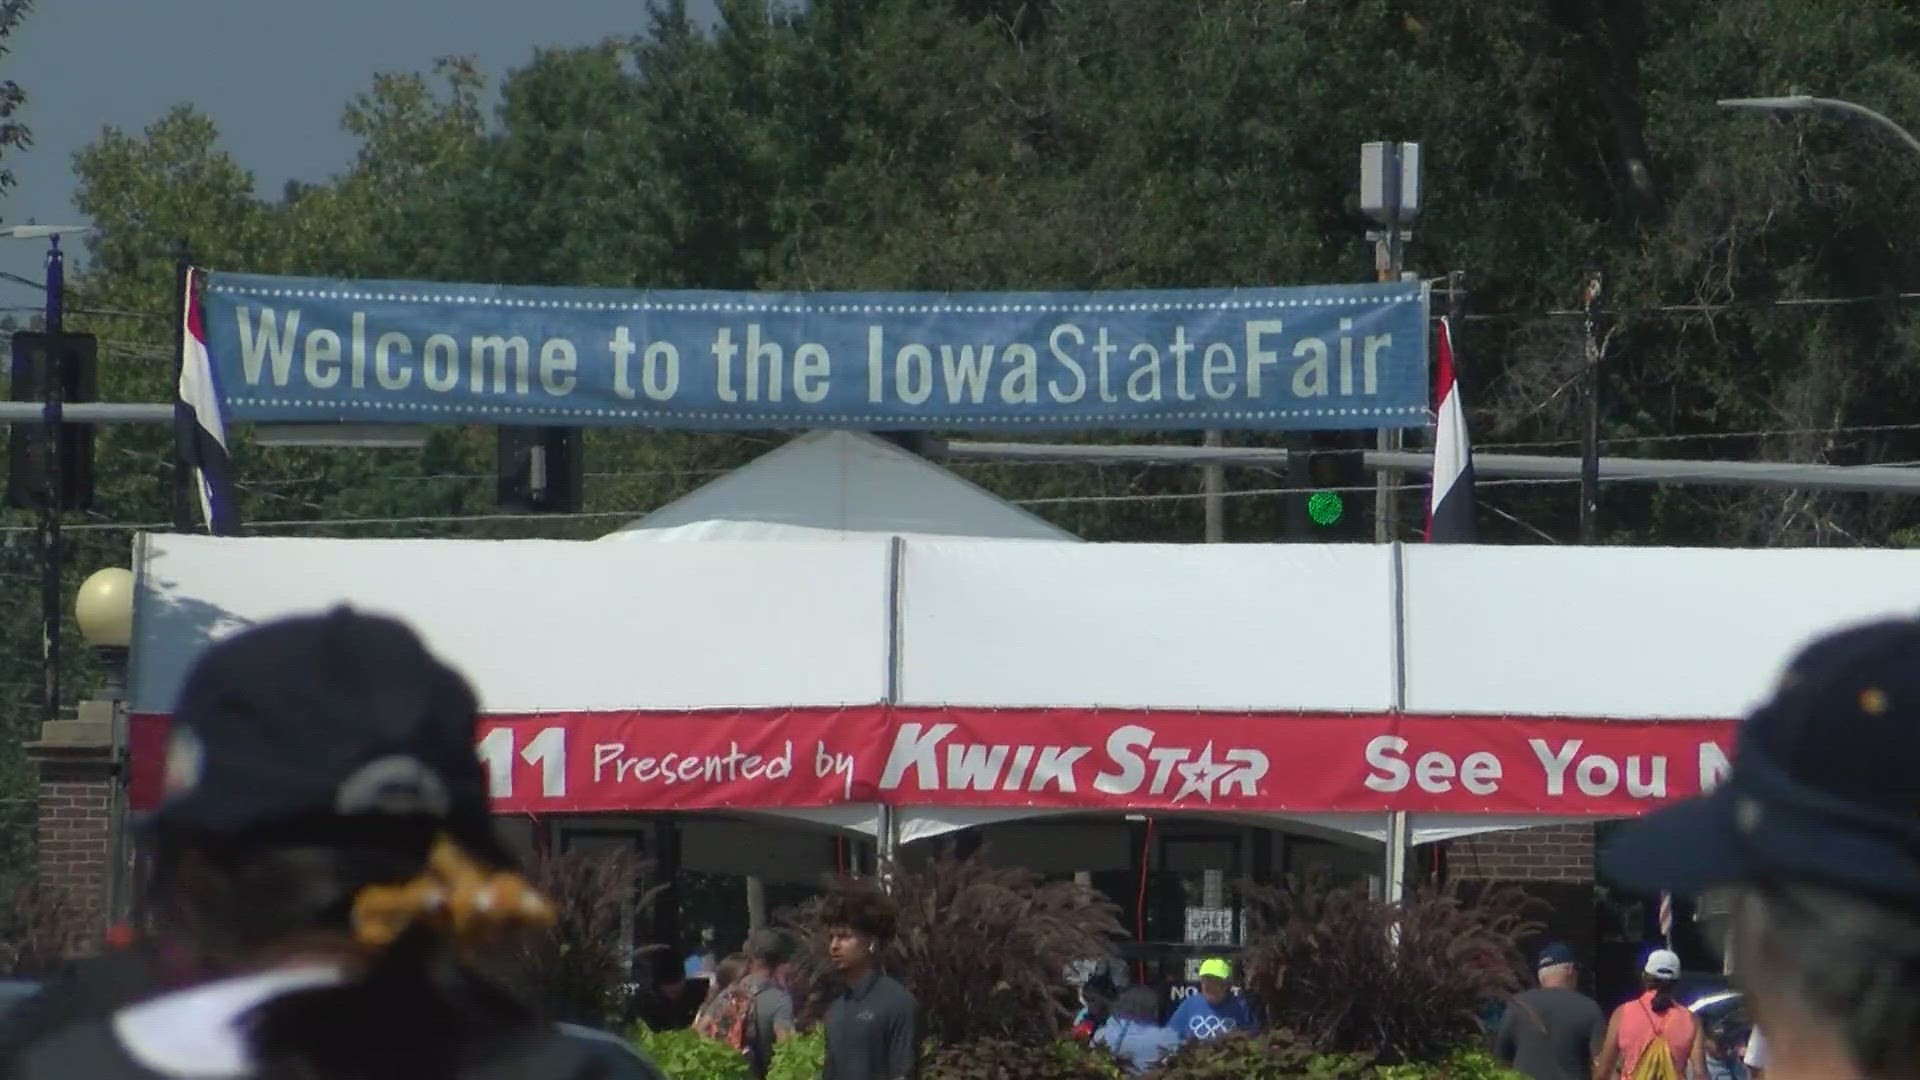 From the food to family time and even camping, here's how visitors are enjoying the Iowa State Fair.